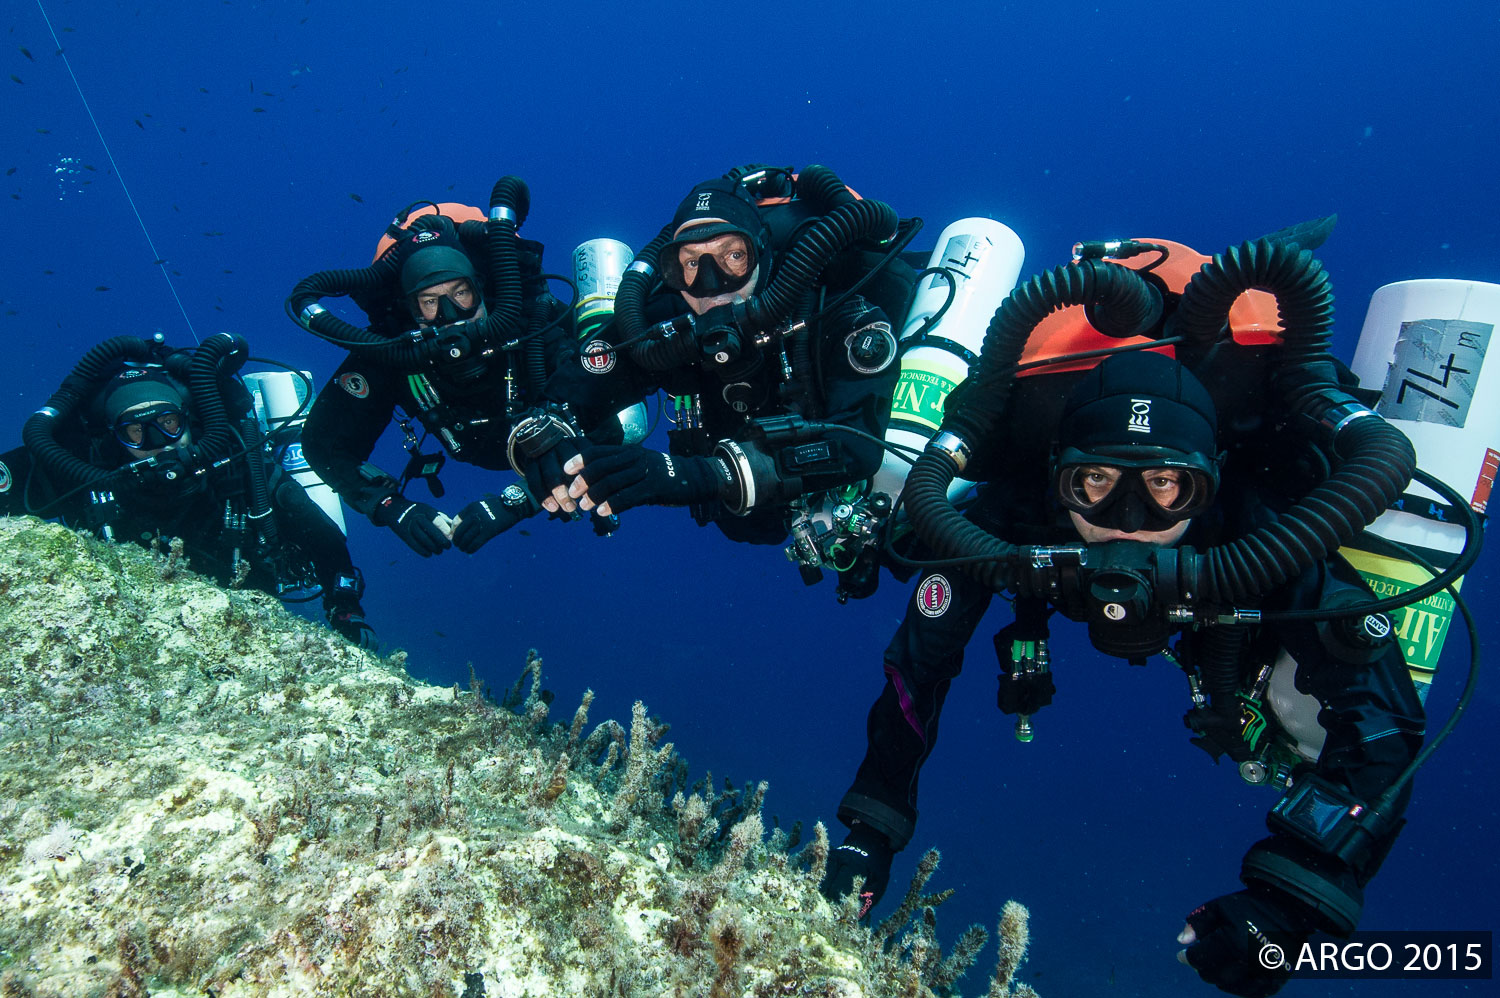 Dives are staged to maximise efficiency, with decompression time often overlapping so that multiple buddy pairs complete their hang time together.